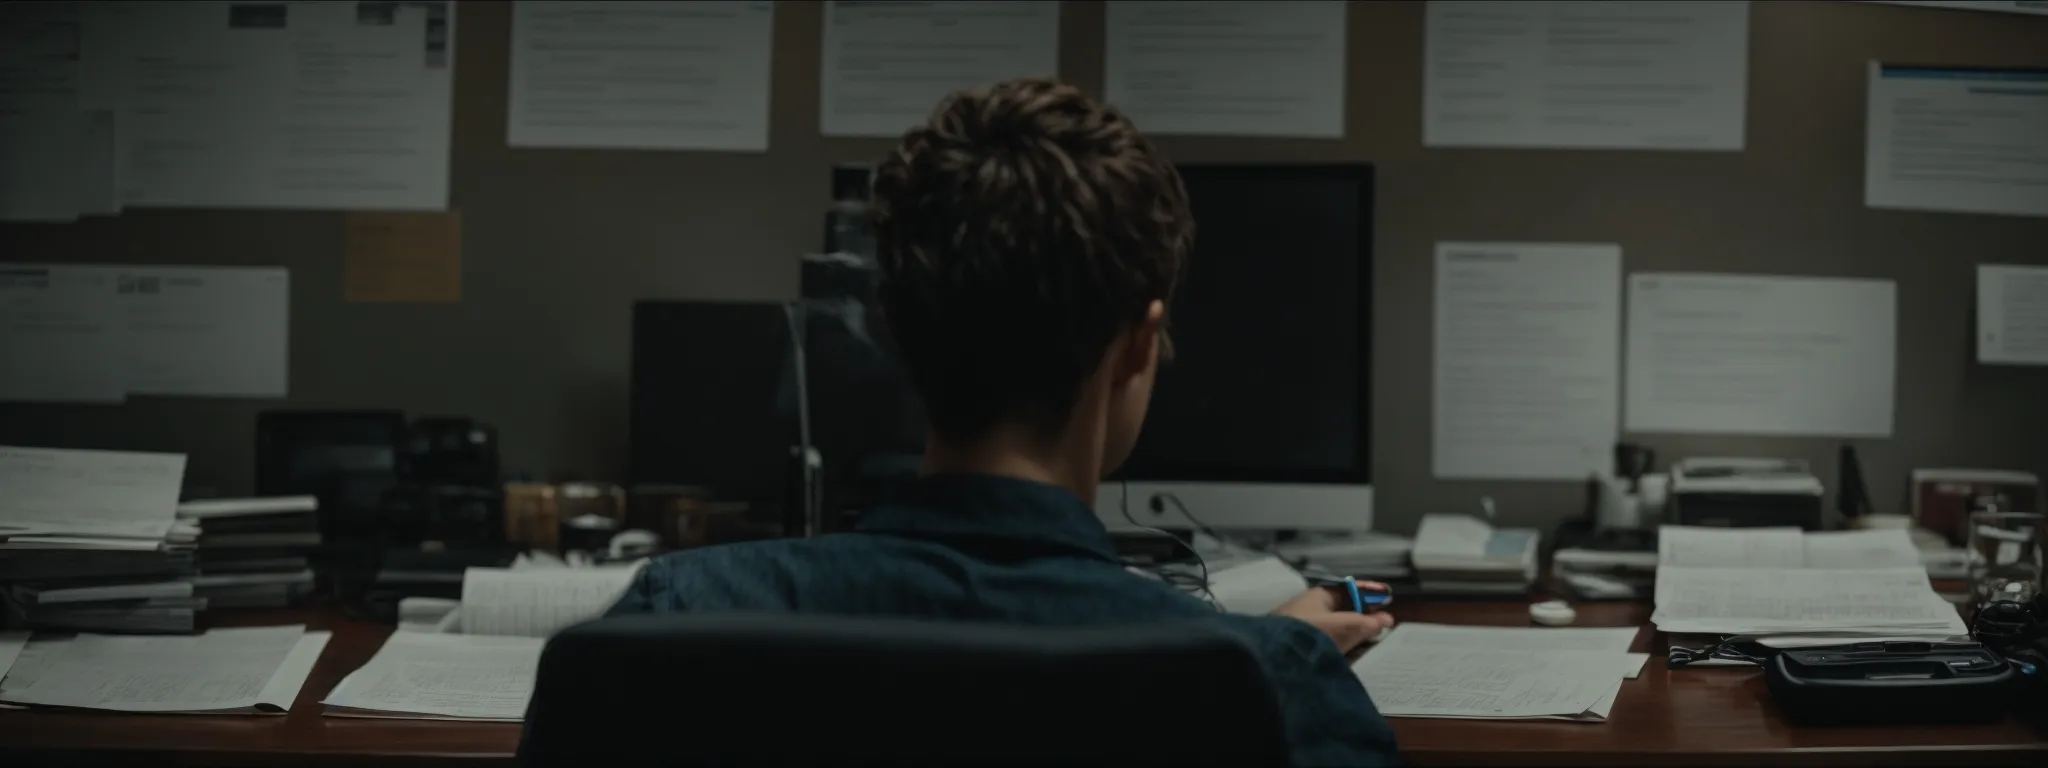 a person sits at a desk, intently focused on a computer screen surrounded by notes, highlighting the concentration required for quality content creation.